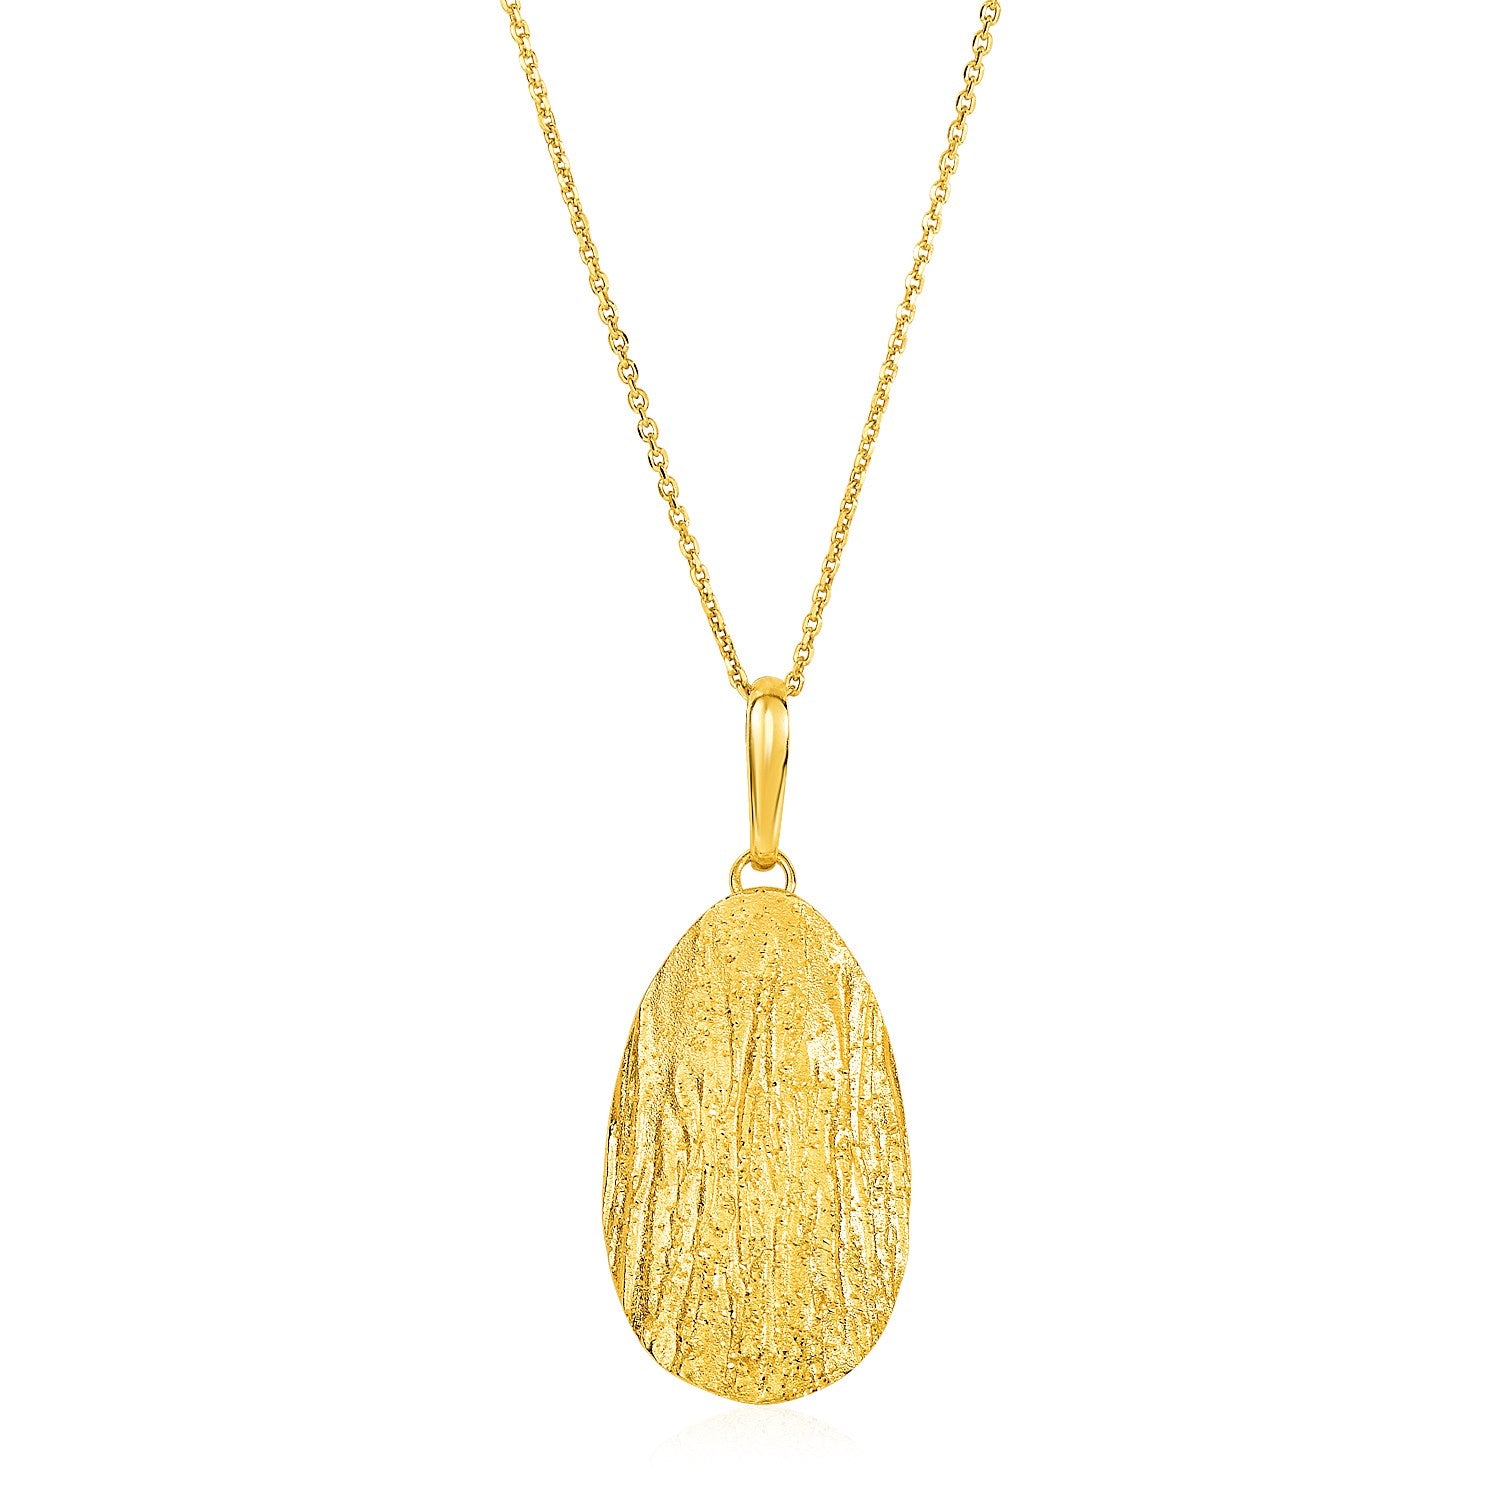 Textured Oval Pendant with Yellow Finish in Sterling Silver